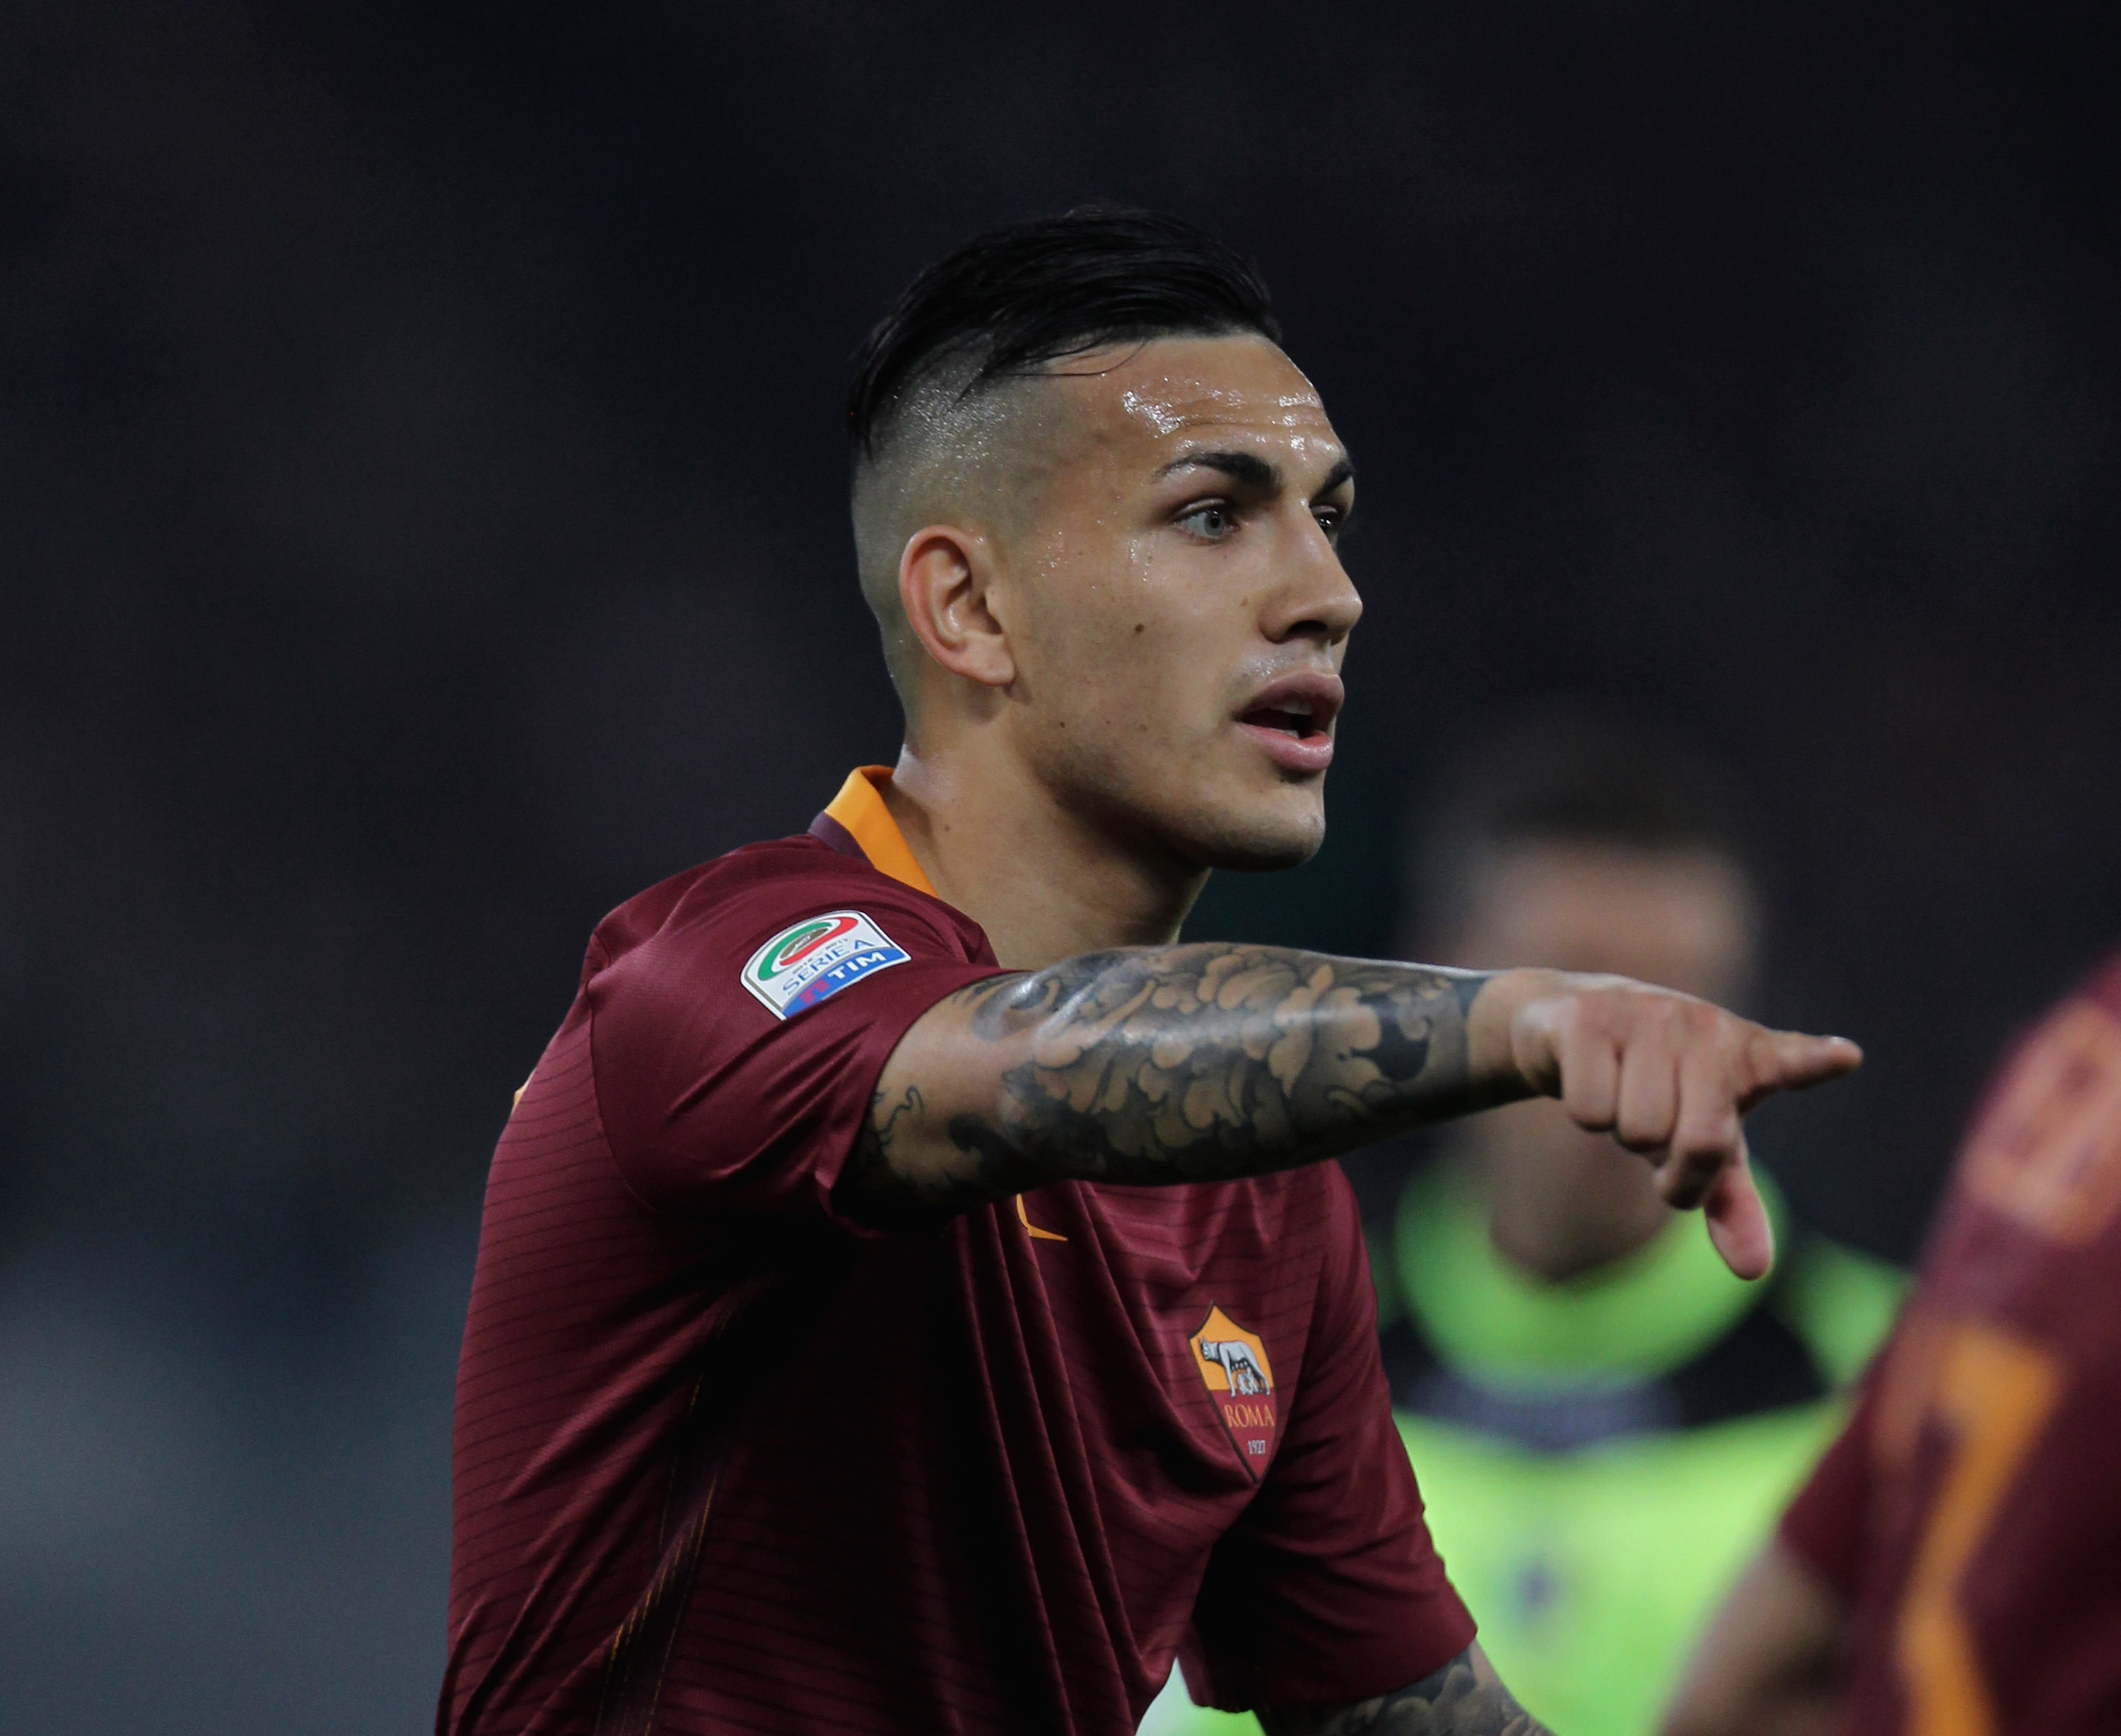 ROME, ITALY - APRIL 01:  Leandro Paredes of AS Roma gestures during the Serie A match between AS Roma and Empoli FC at Stadio Olimpico on April 1, 2017 in Rome, Italy.  (Photo by Paolo Bruno/Getty Images)